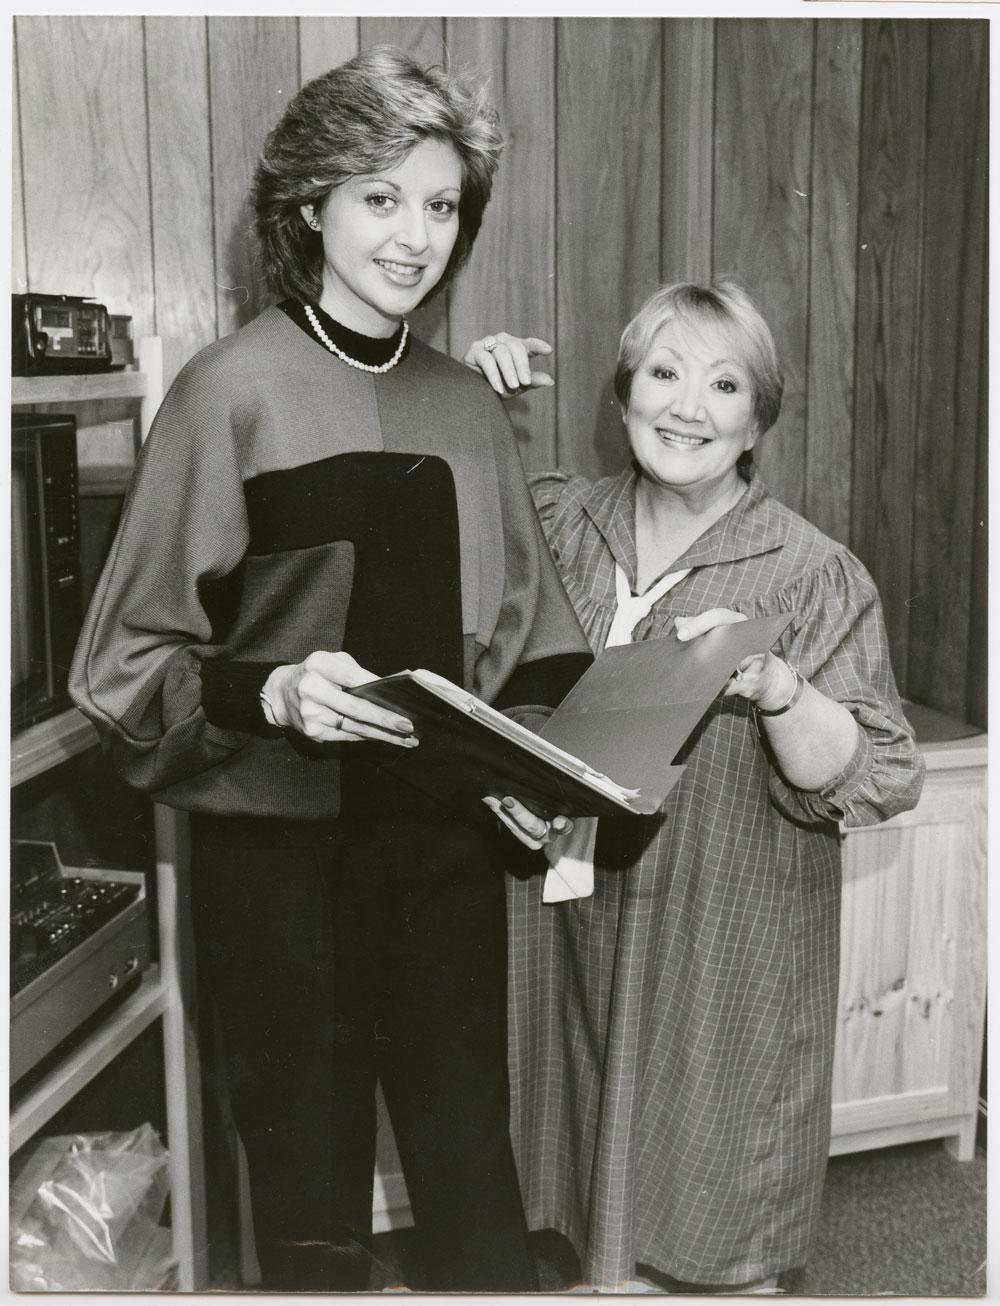 Image 1 of 5 - Photograph of June Bronhill taken when she was a guest on the television program “Adelaide Today” hosted by Amanda Halvorse. June and Amanda stand next to each other holding open between them a folder with some papers.